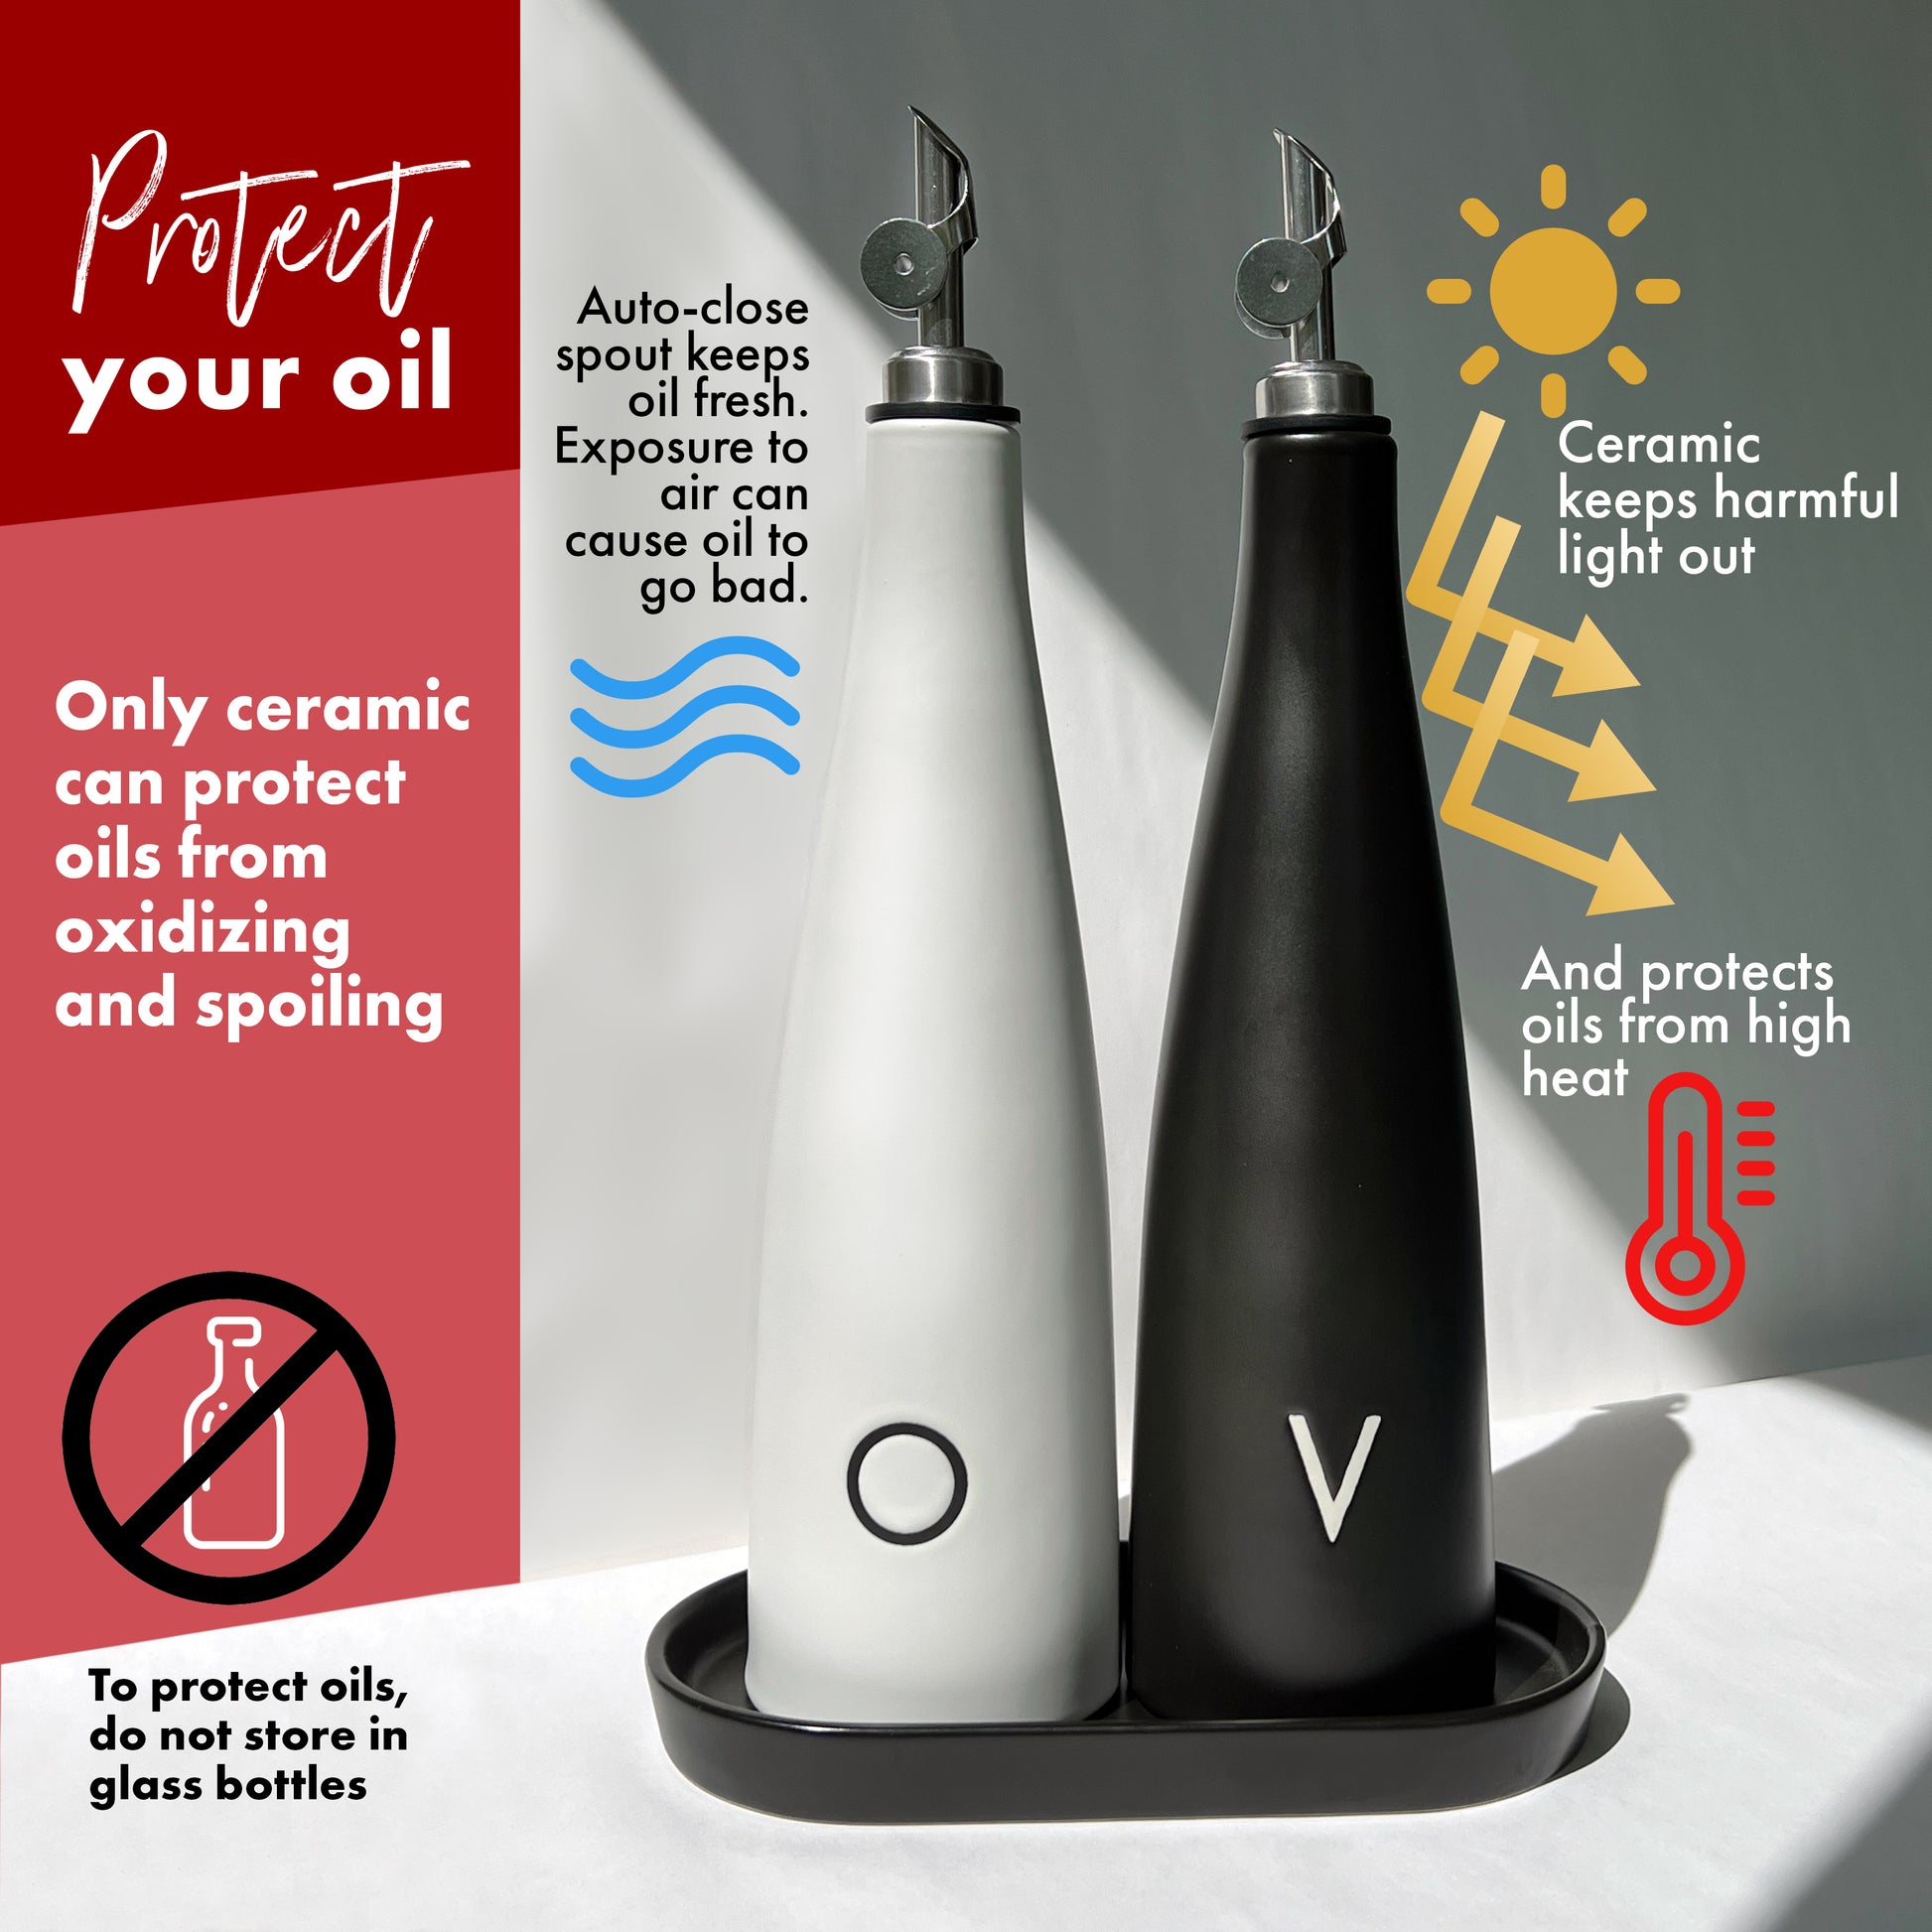 Ceramic Oil and Vinegar Cruet Set - Protective Oil and Vinegar Dispenser  Set, Premium Olive Oil Dispenser Bottle for Kitchen with Matching Vinegar  Dispenser Bottle, Ceramic Olive Oil Container With Mess-free Auto